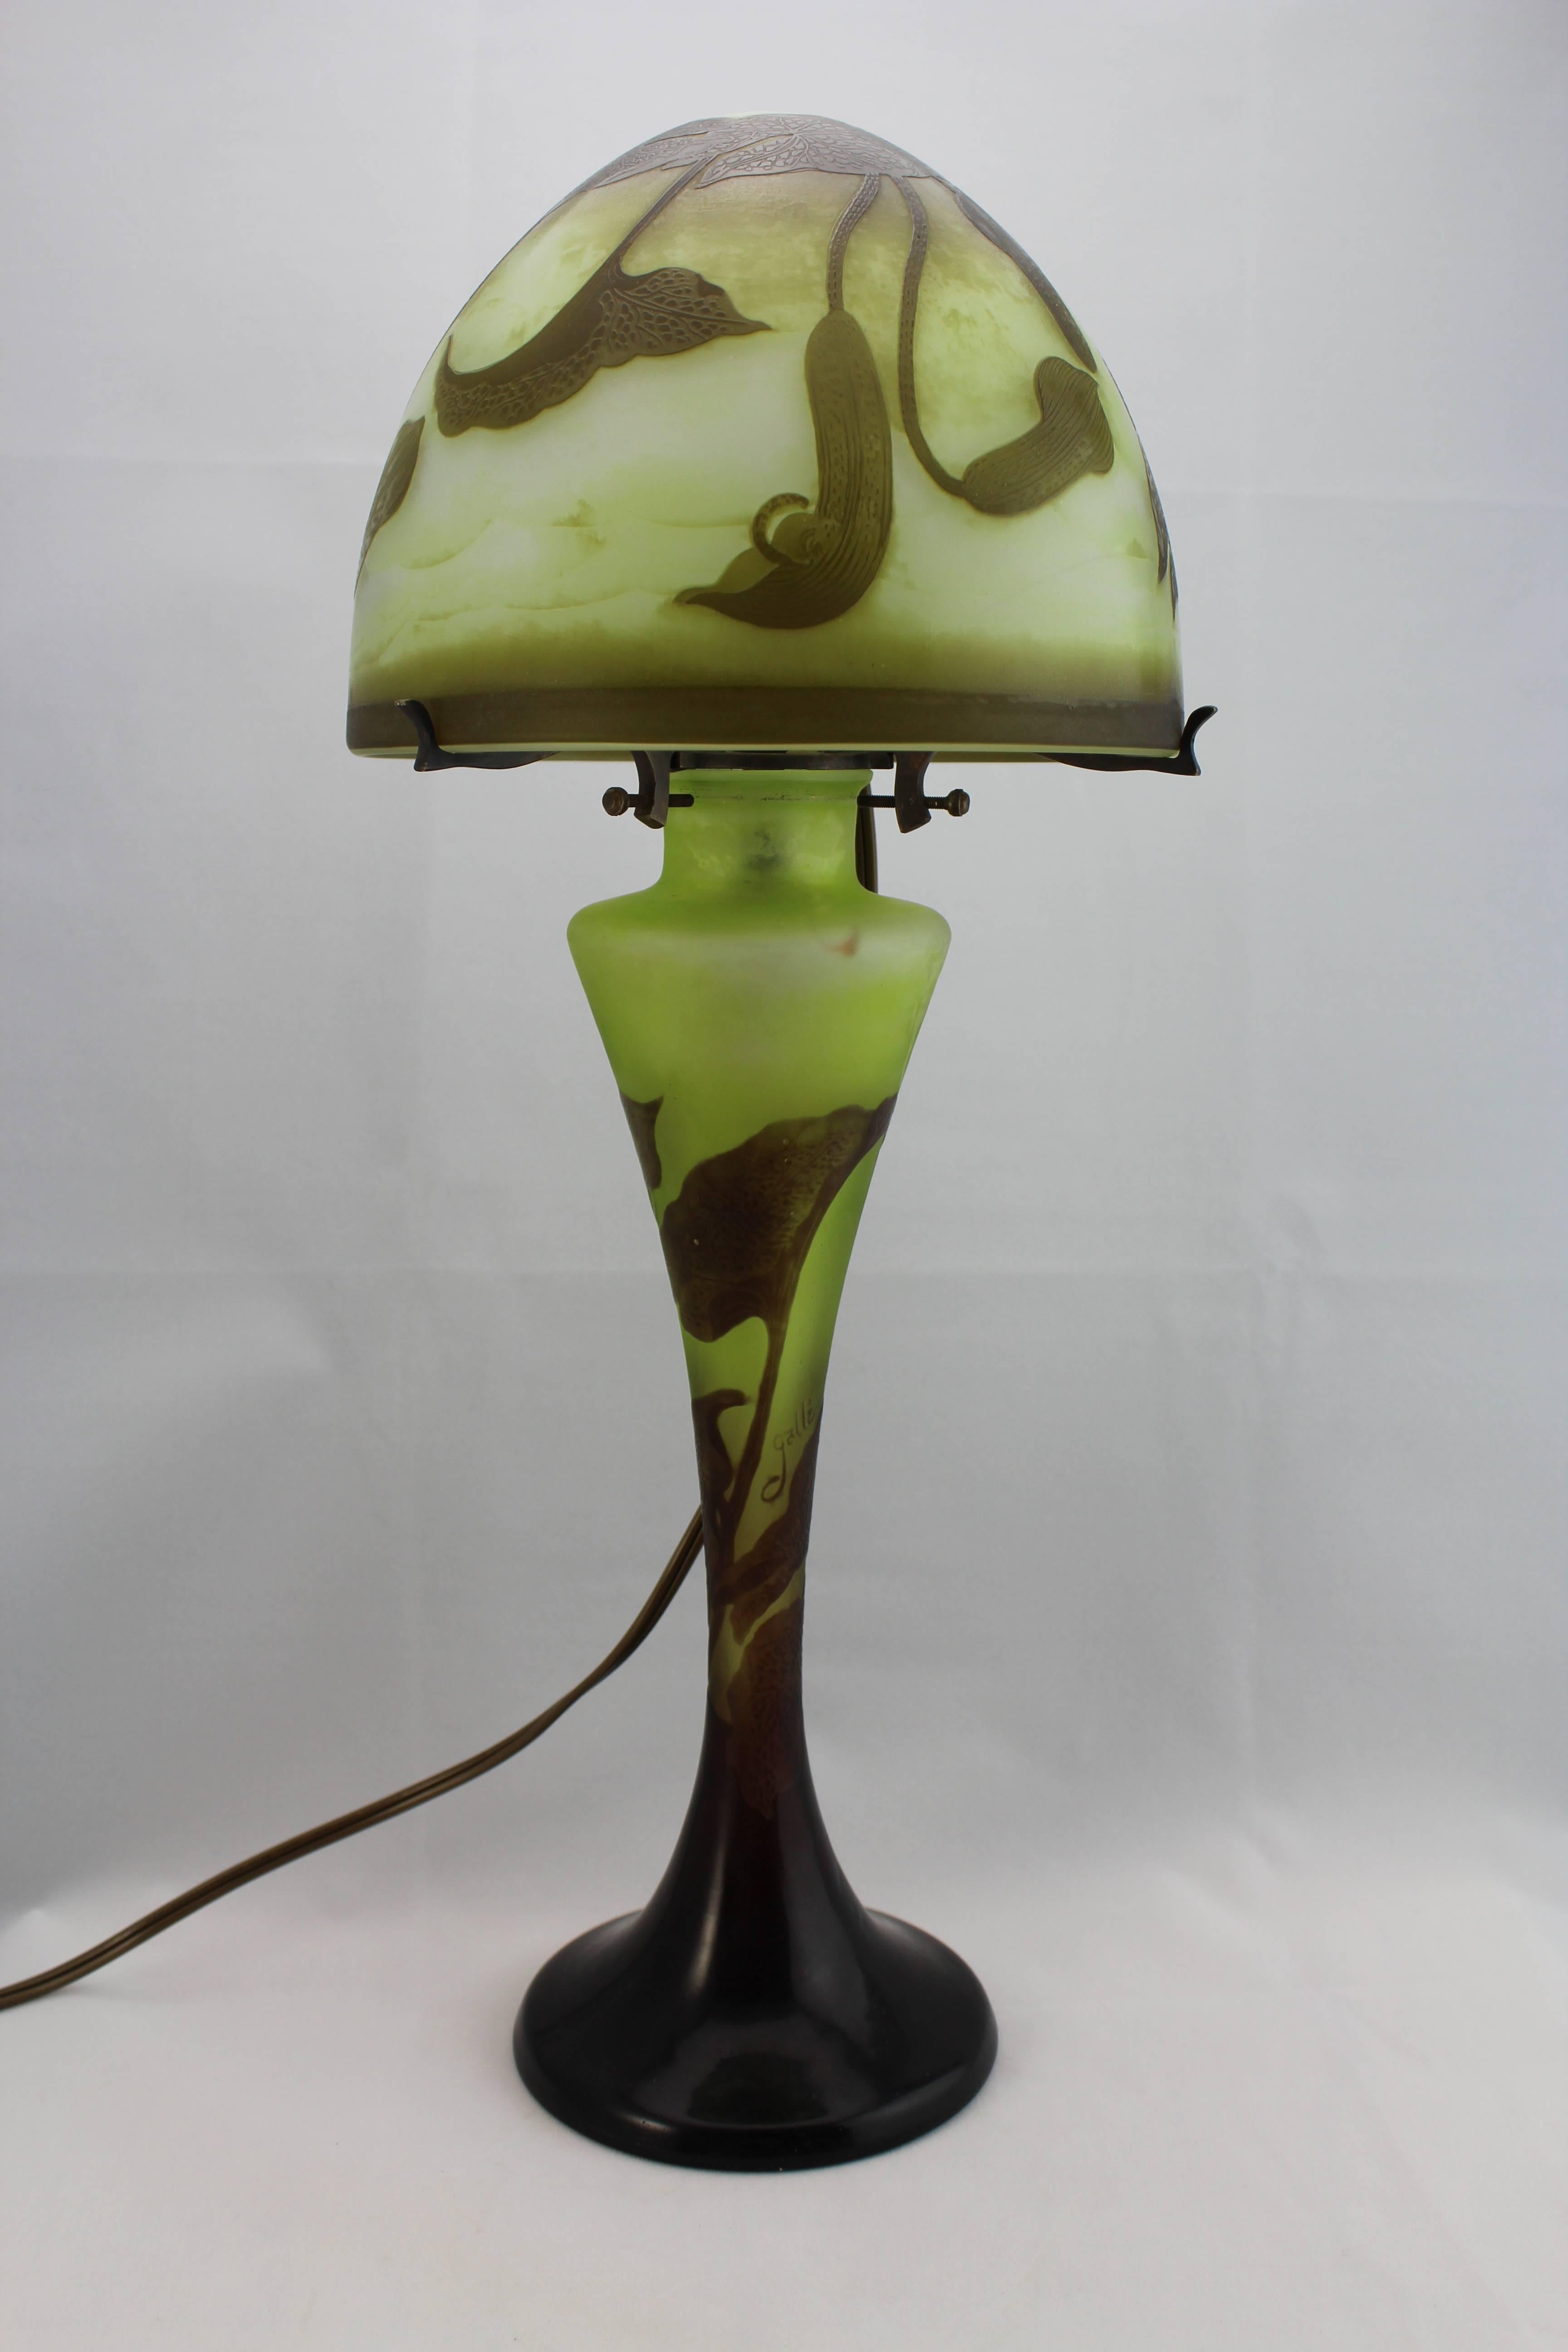 Authentic Emile Galle Cameo lamp, circa 1900 cameo, acid etched with three colors; cream, green, brown and purple. The lamp displays an art nouveau seaweed and aquatic motif. Perfect condition with only a few scratches around fitting.

Please